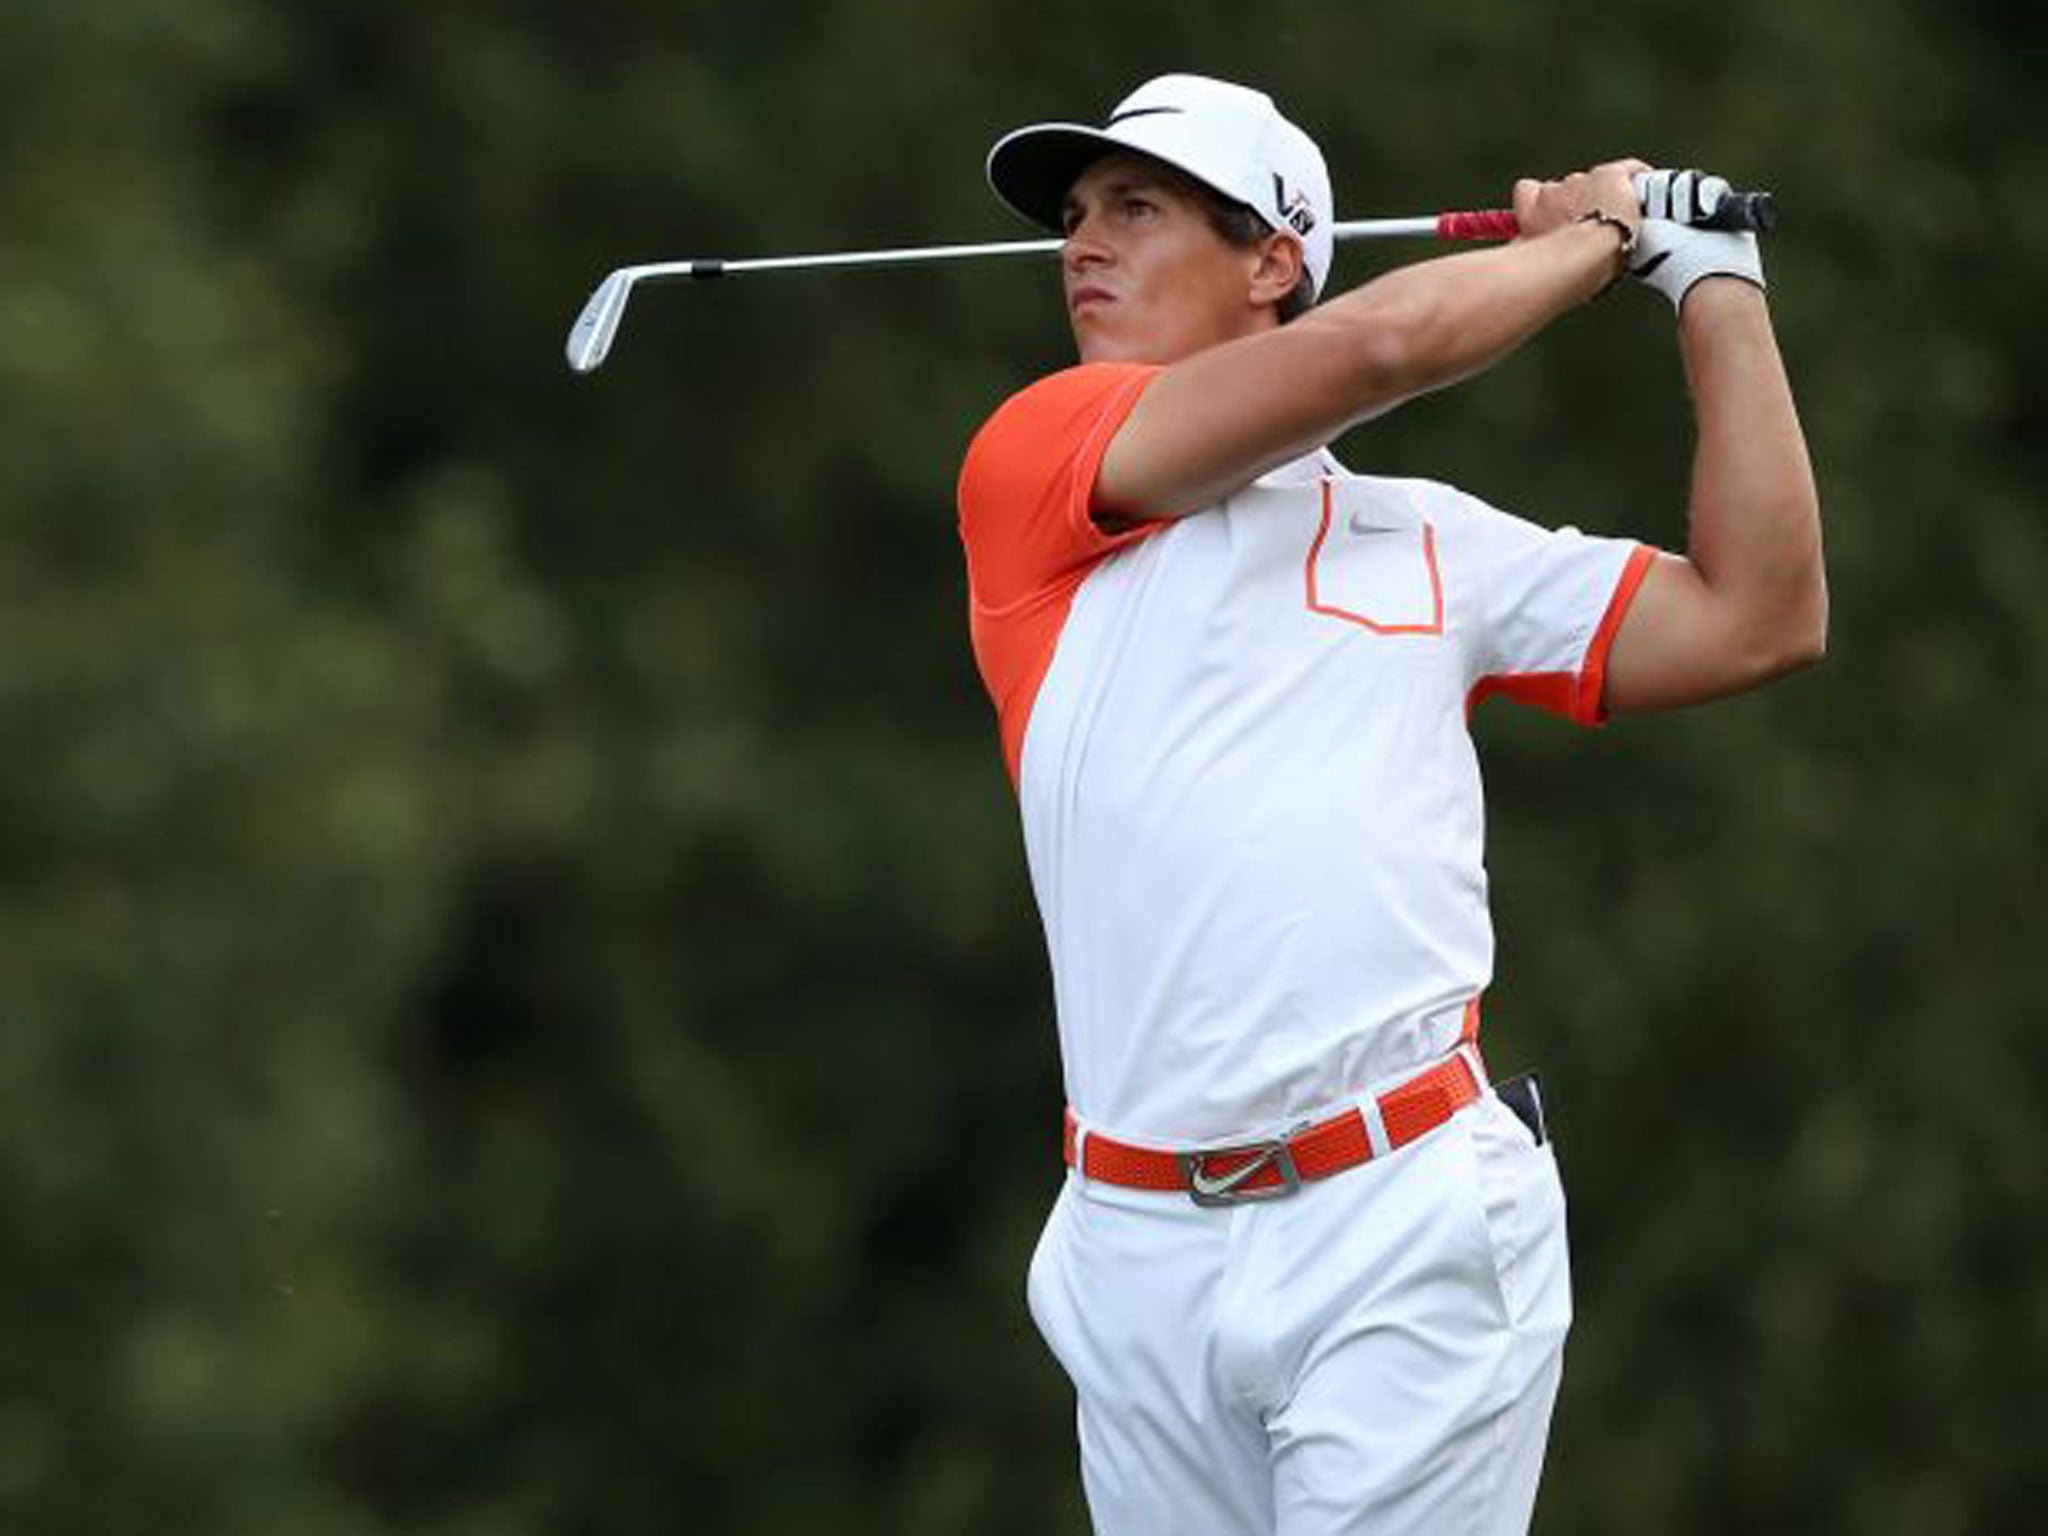 Denmark’s Thorbjorn Olesen posted an under par score from the first six groups